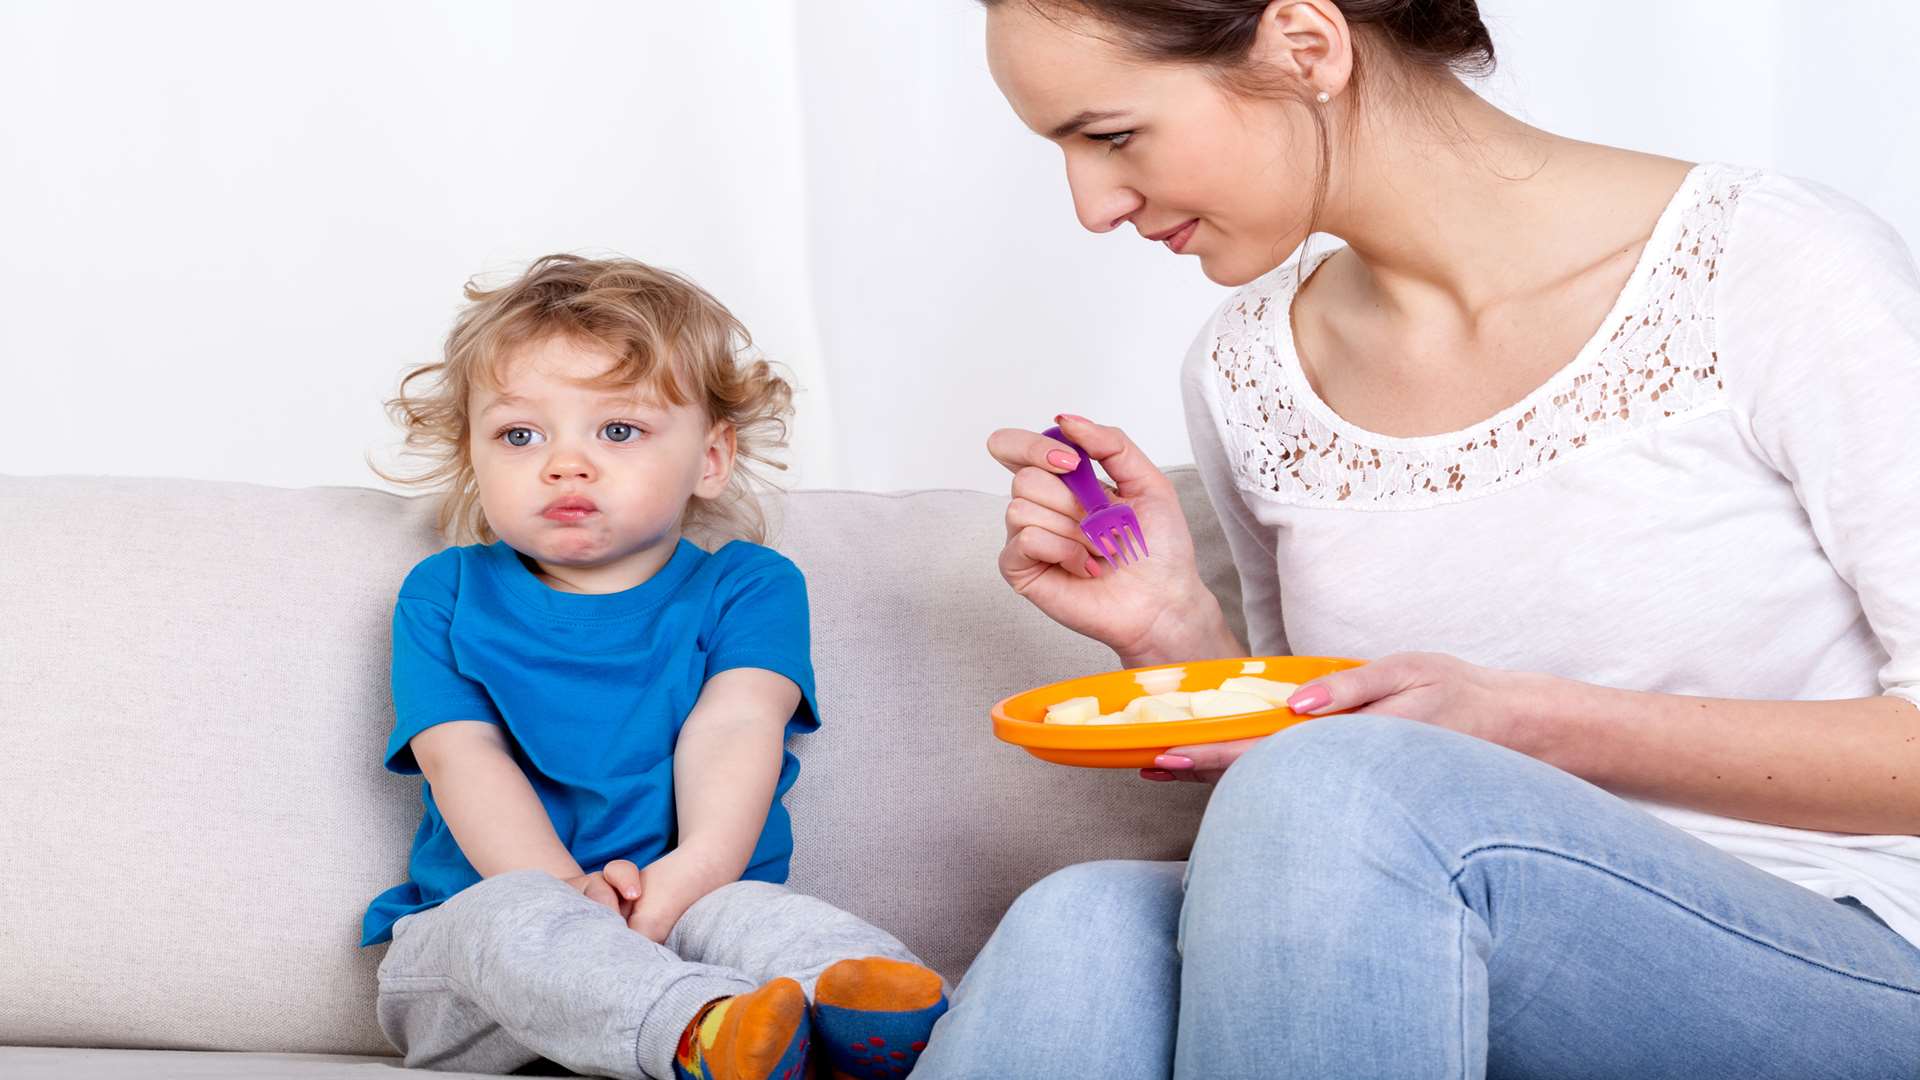 Most kids are picky eaters at some stage as they grow up